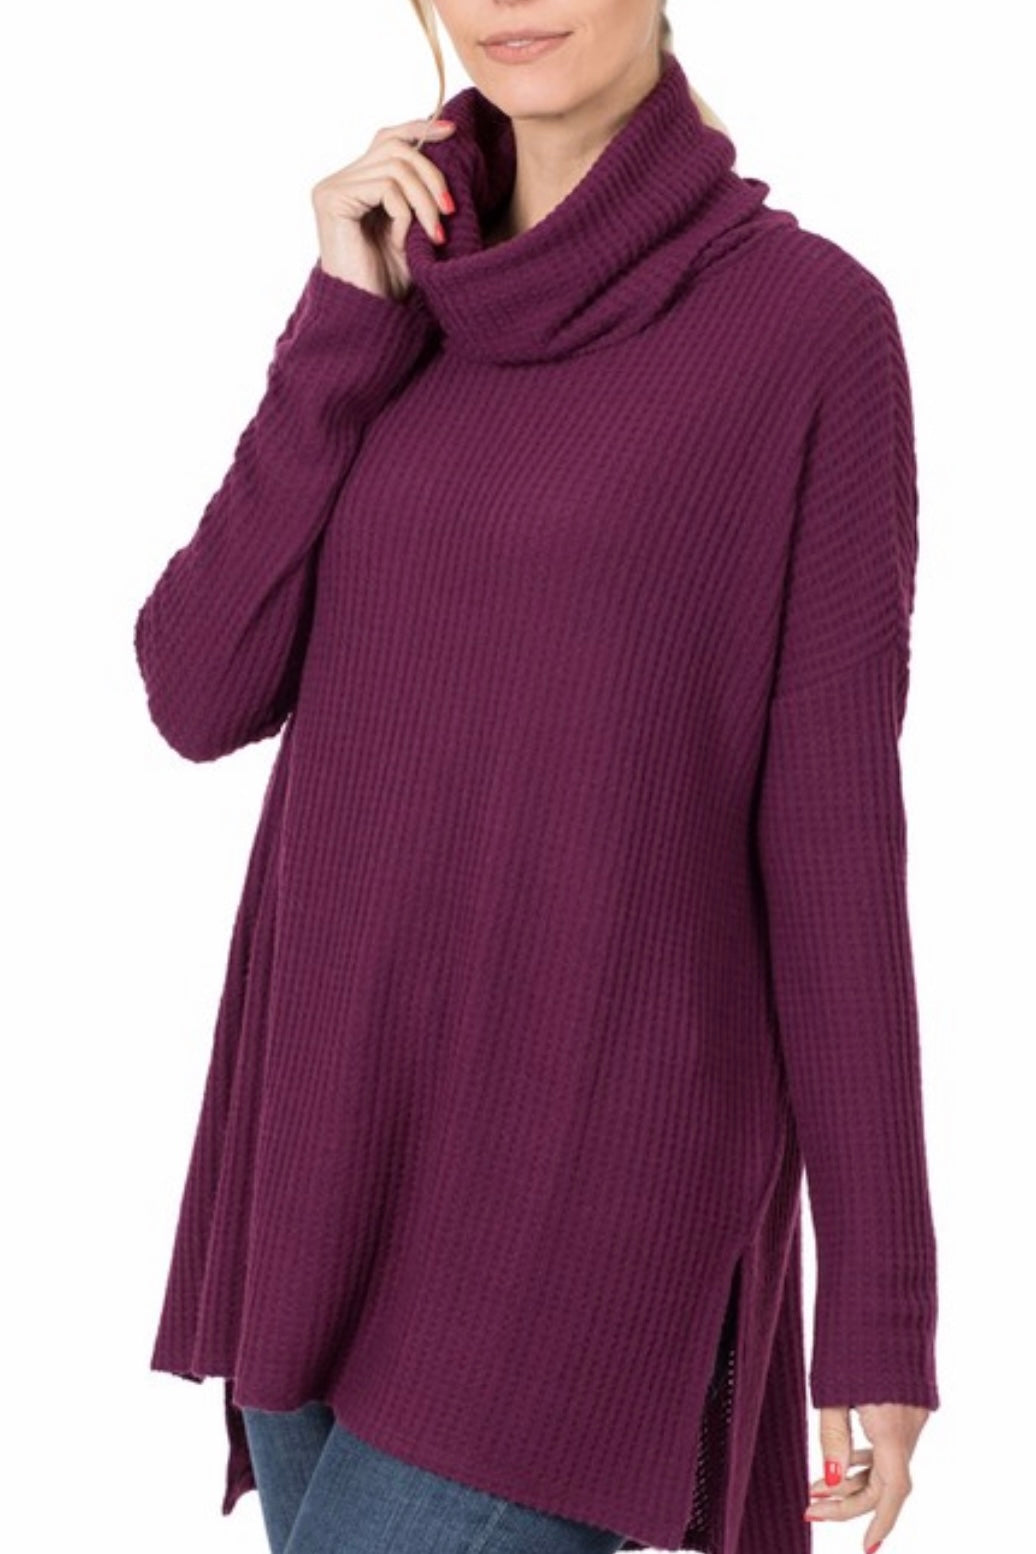 BRUSHED THERMAL WAFFLE COWL NECK HILO